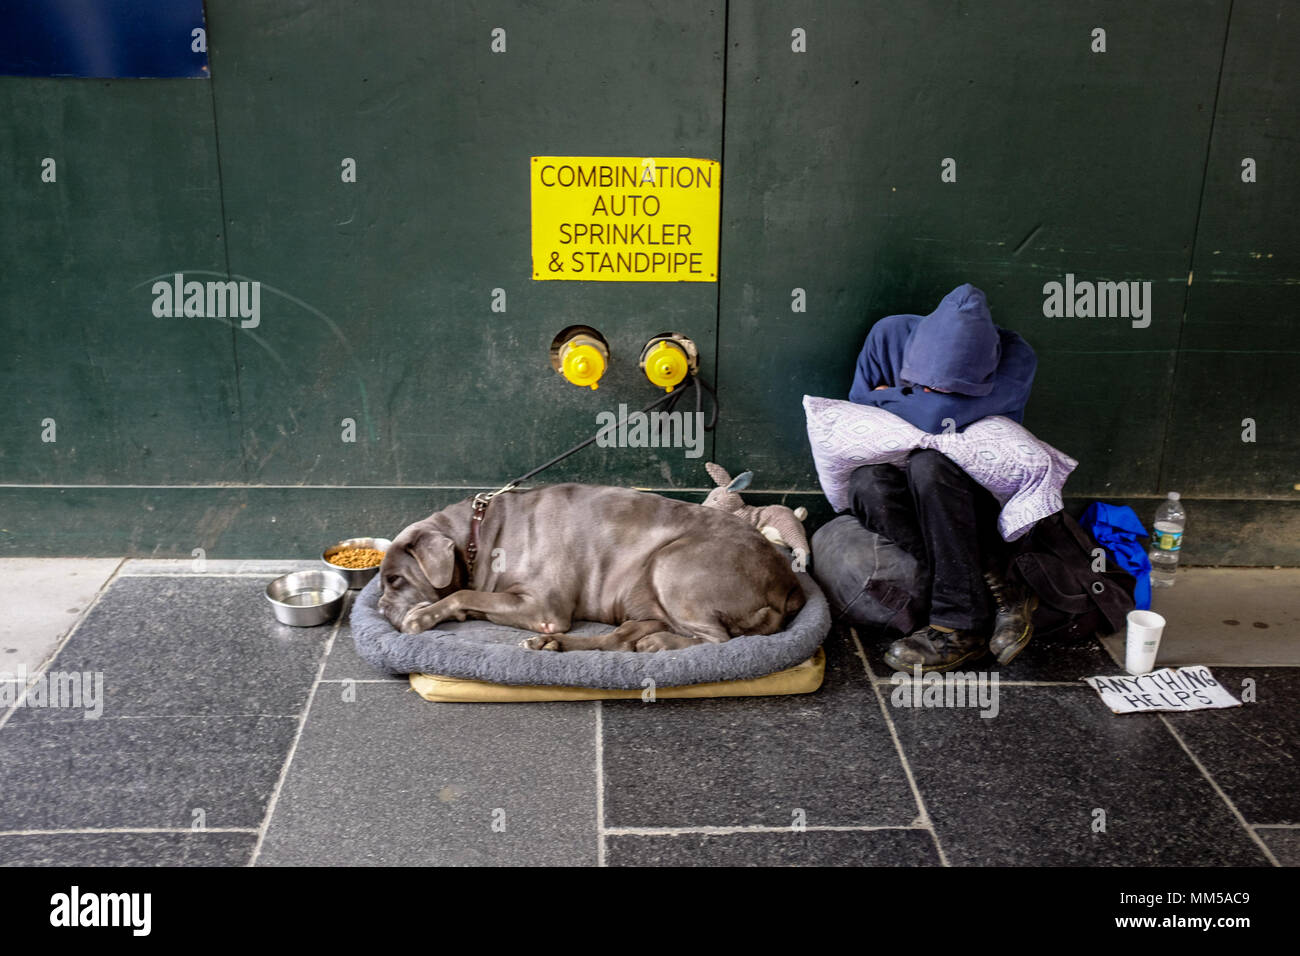 A homeless man and his dog rest during the day in Manhattan, New York City May 6, 2018. Stock Photo